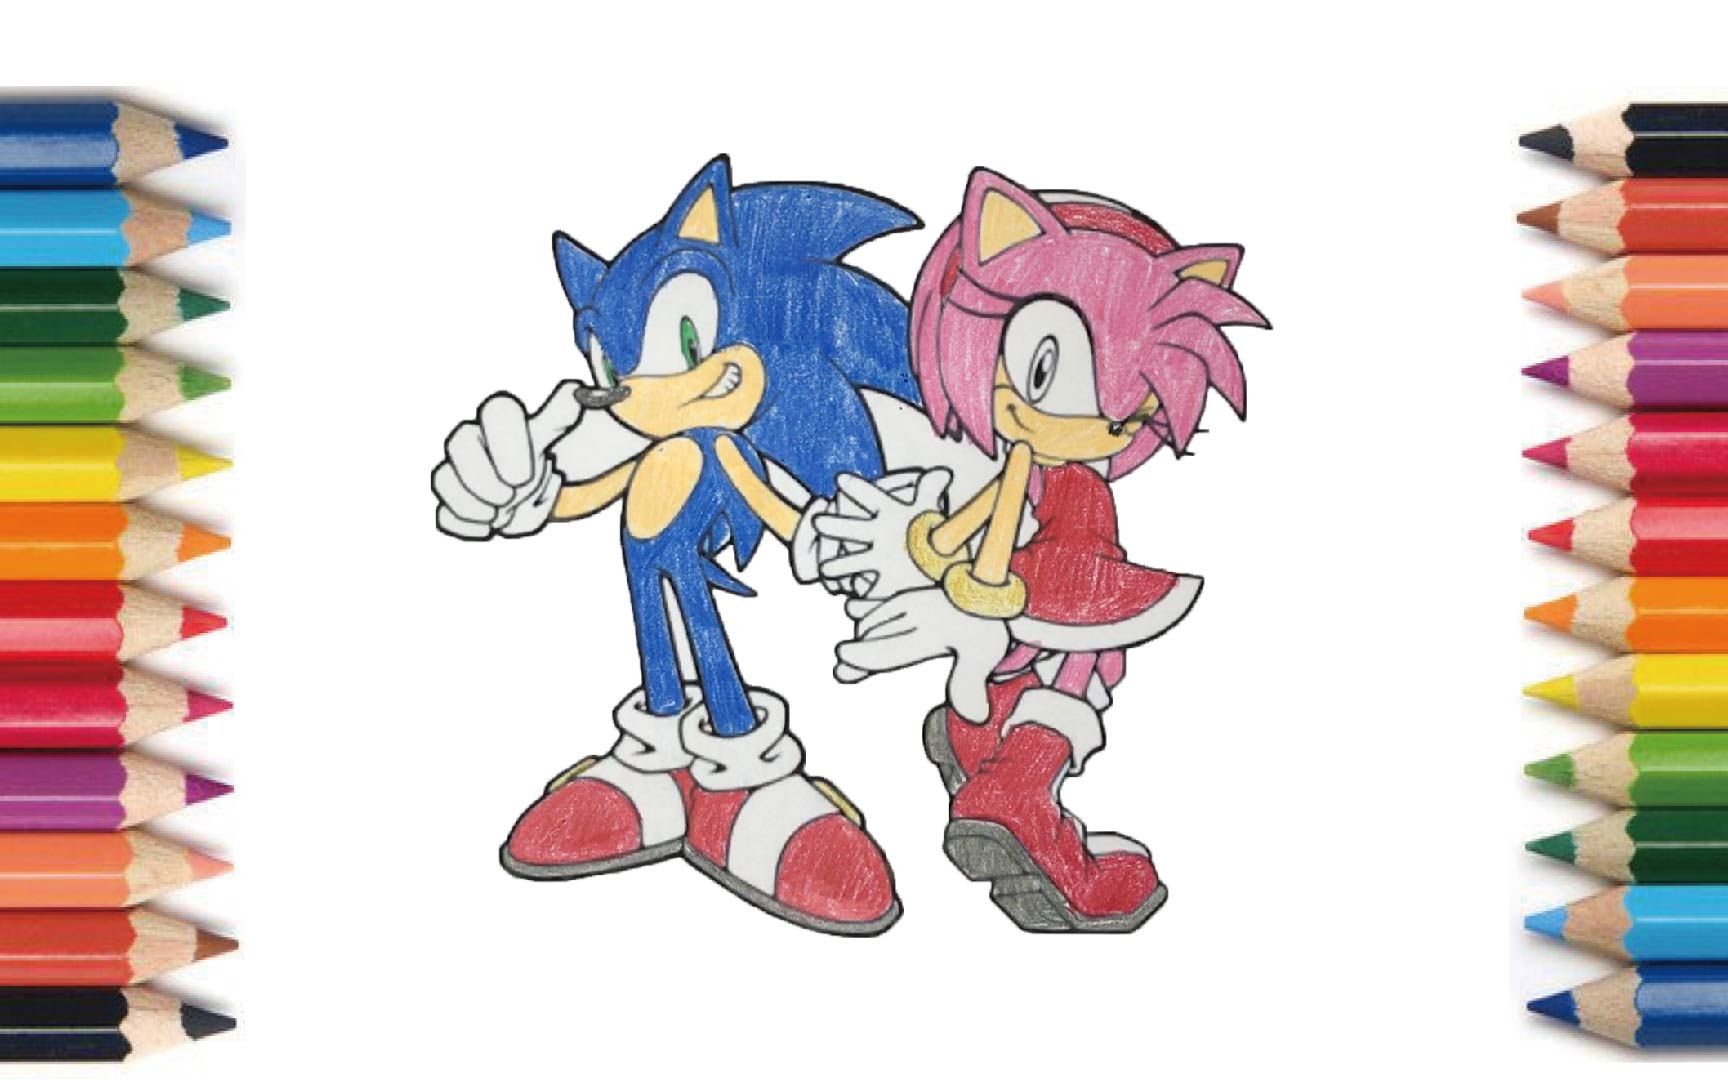 sonic and amy图片